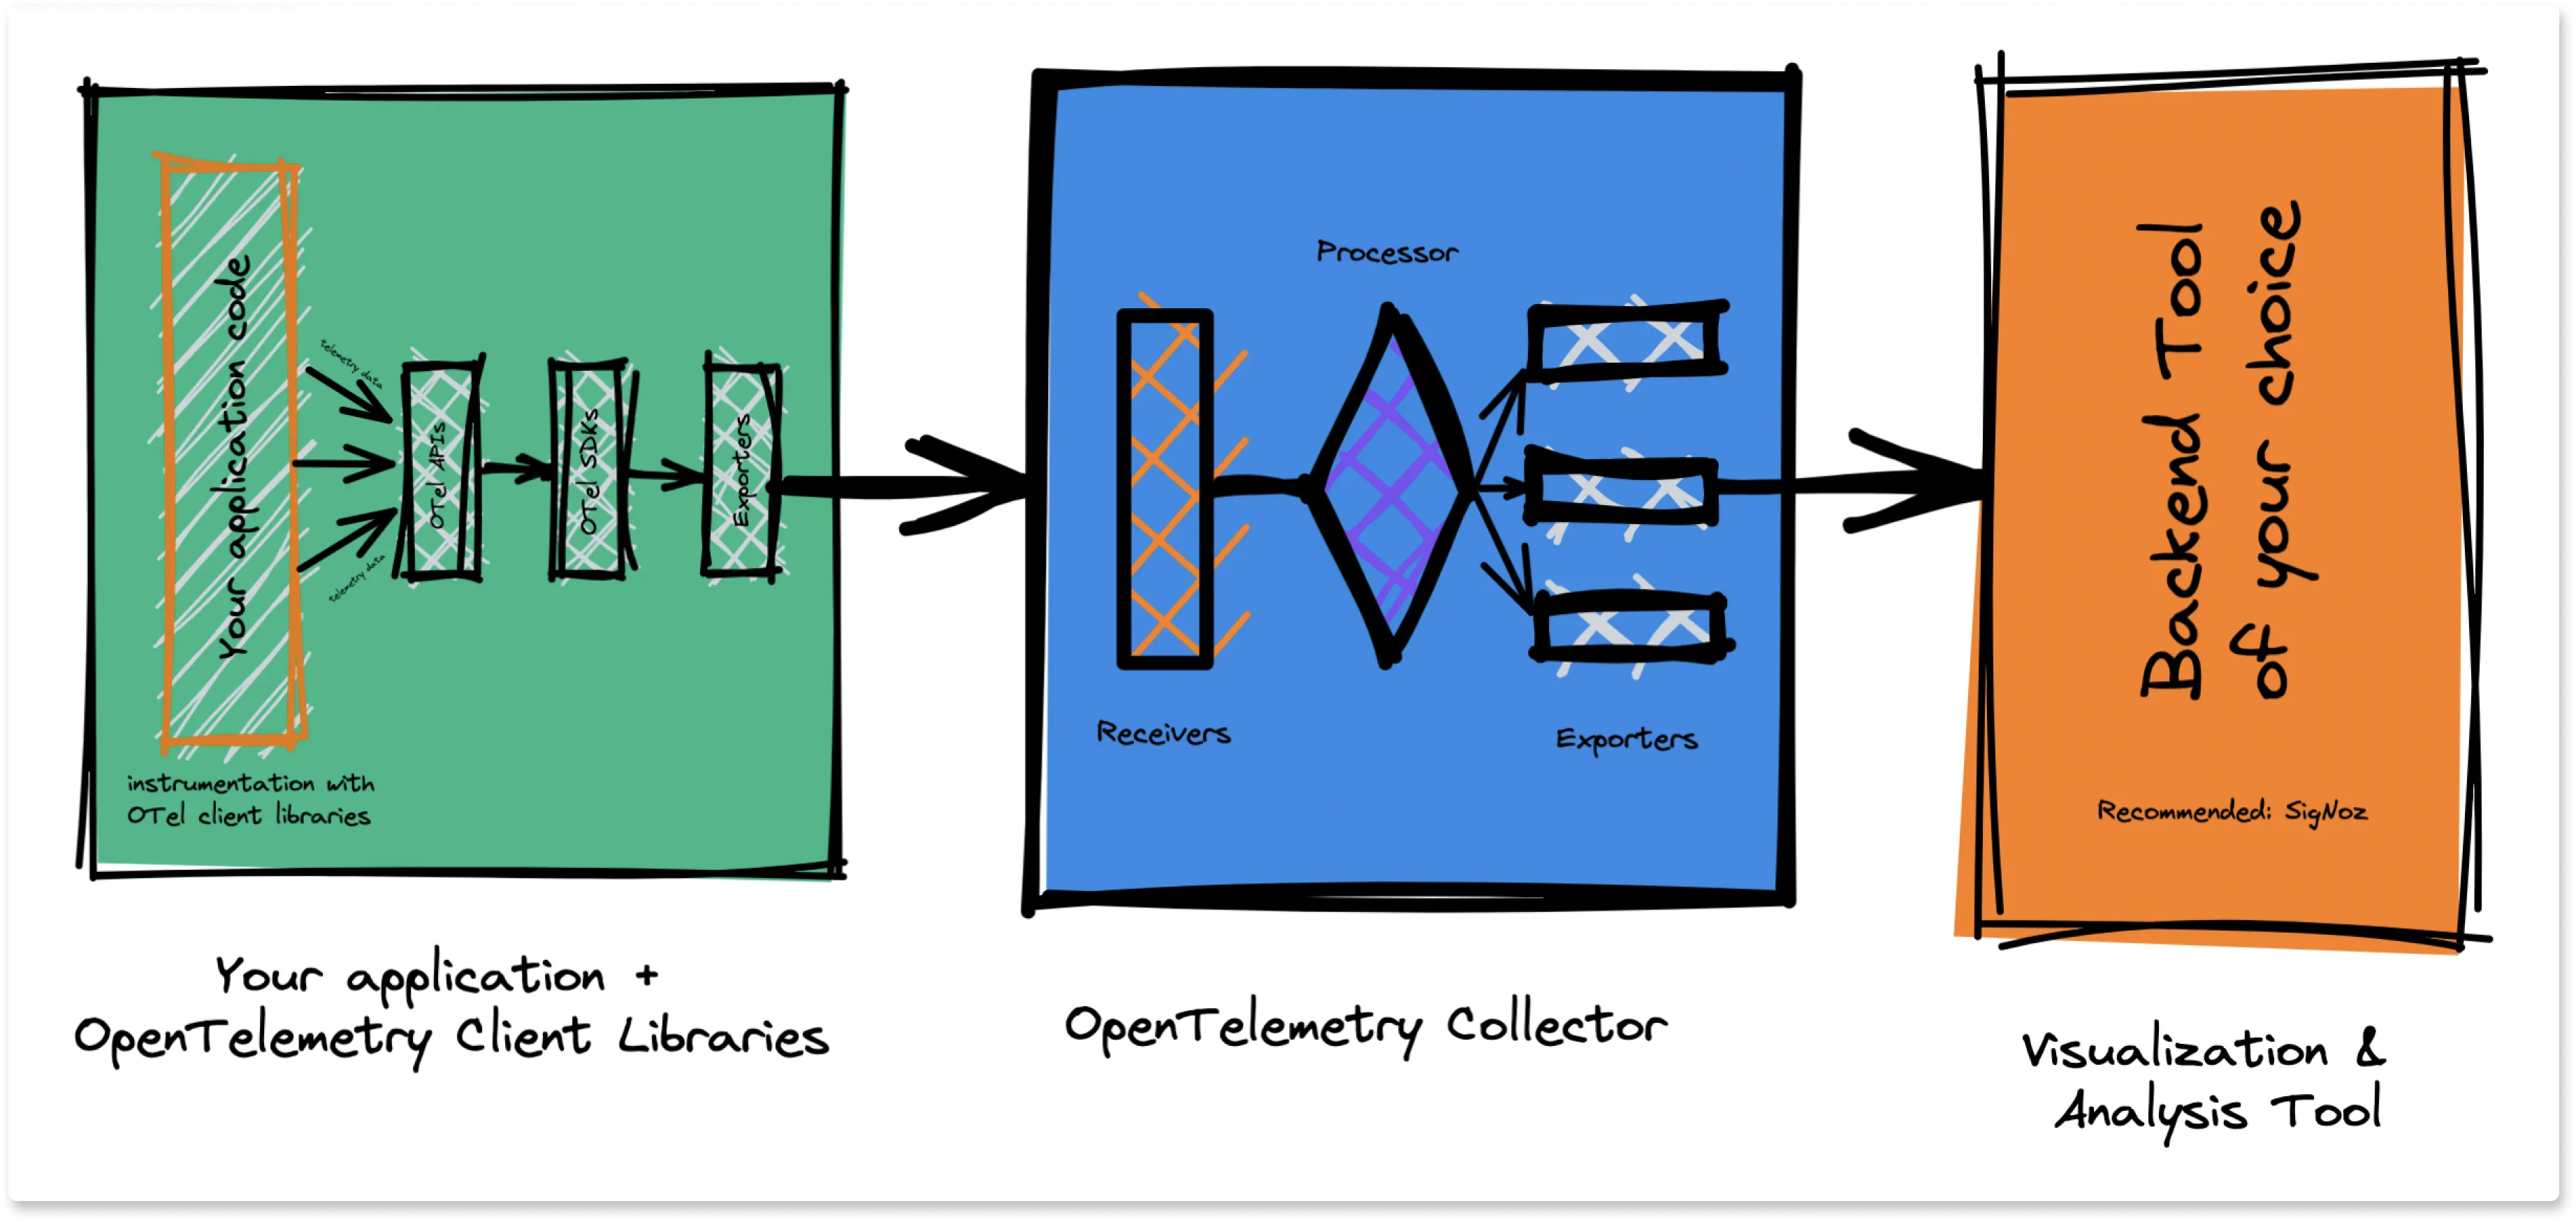 OpenTelemetry uses client libraries to instrument application code which is then sent to OpenTelemetry Collectors. The OTel collector then exports it to a backend analysis tool of your choice.